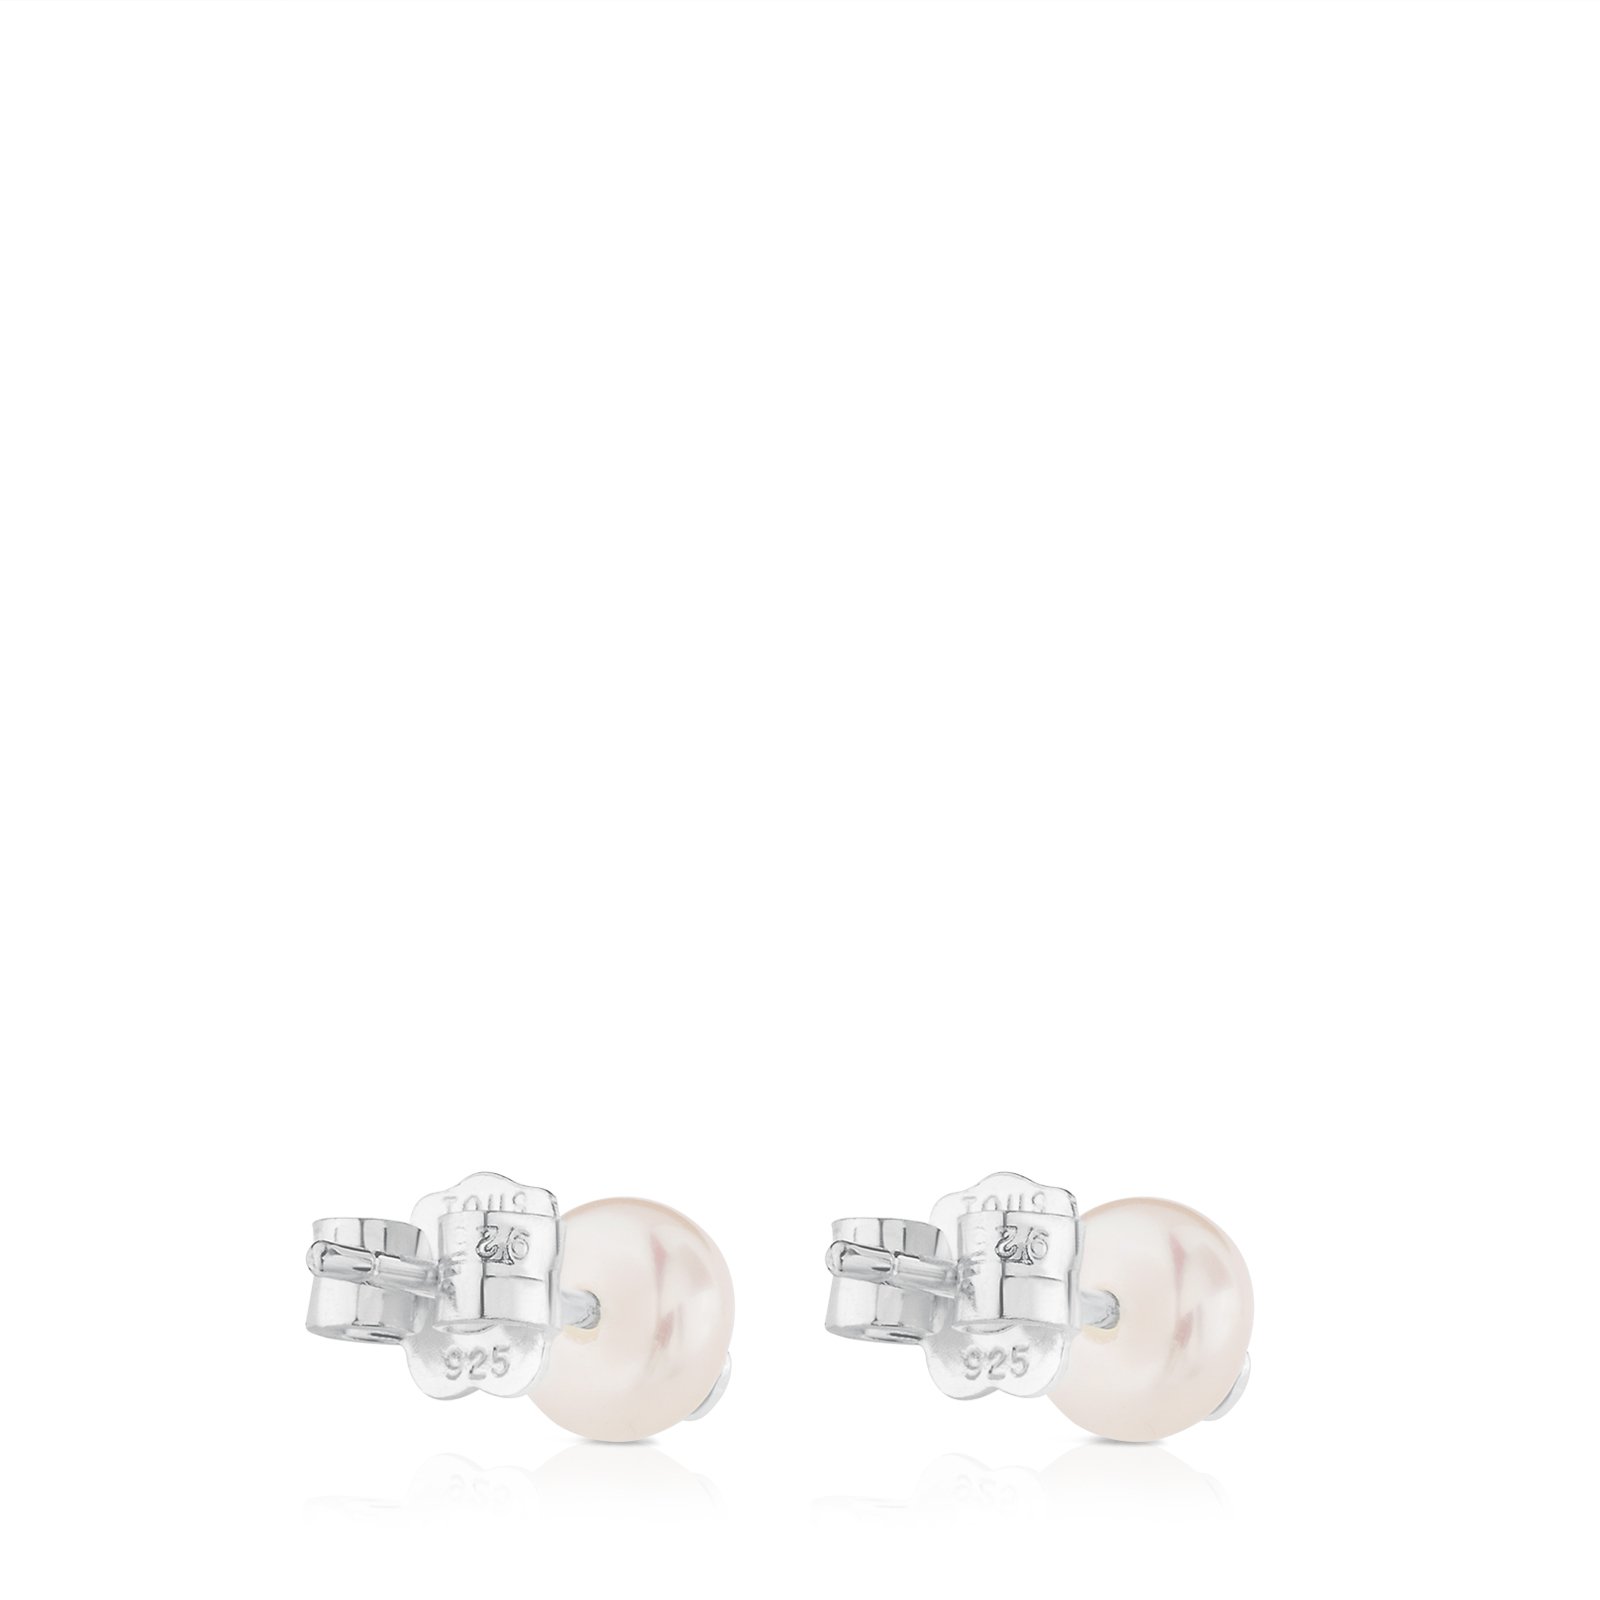 TOUS Bear 925 Silver Stud Earrings with White Freshwater Cultured Pearls